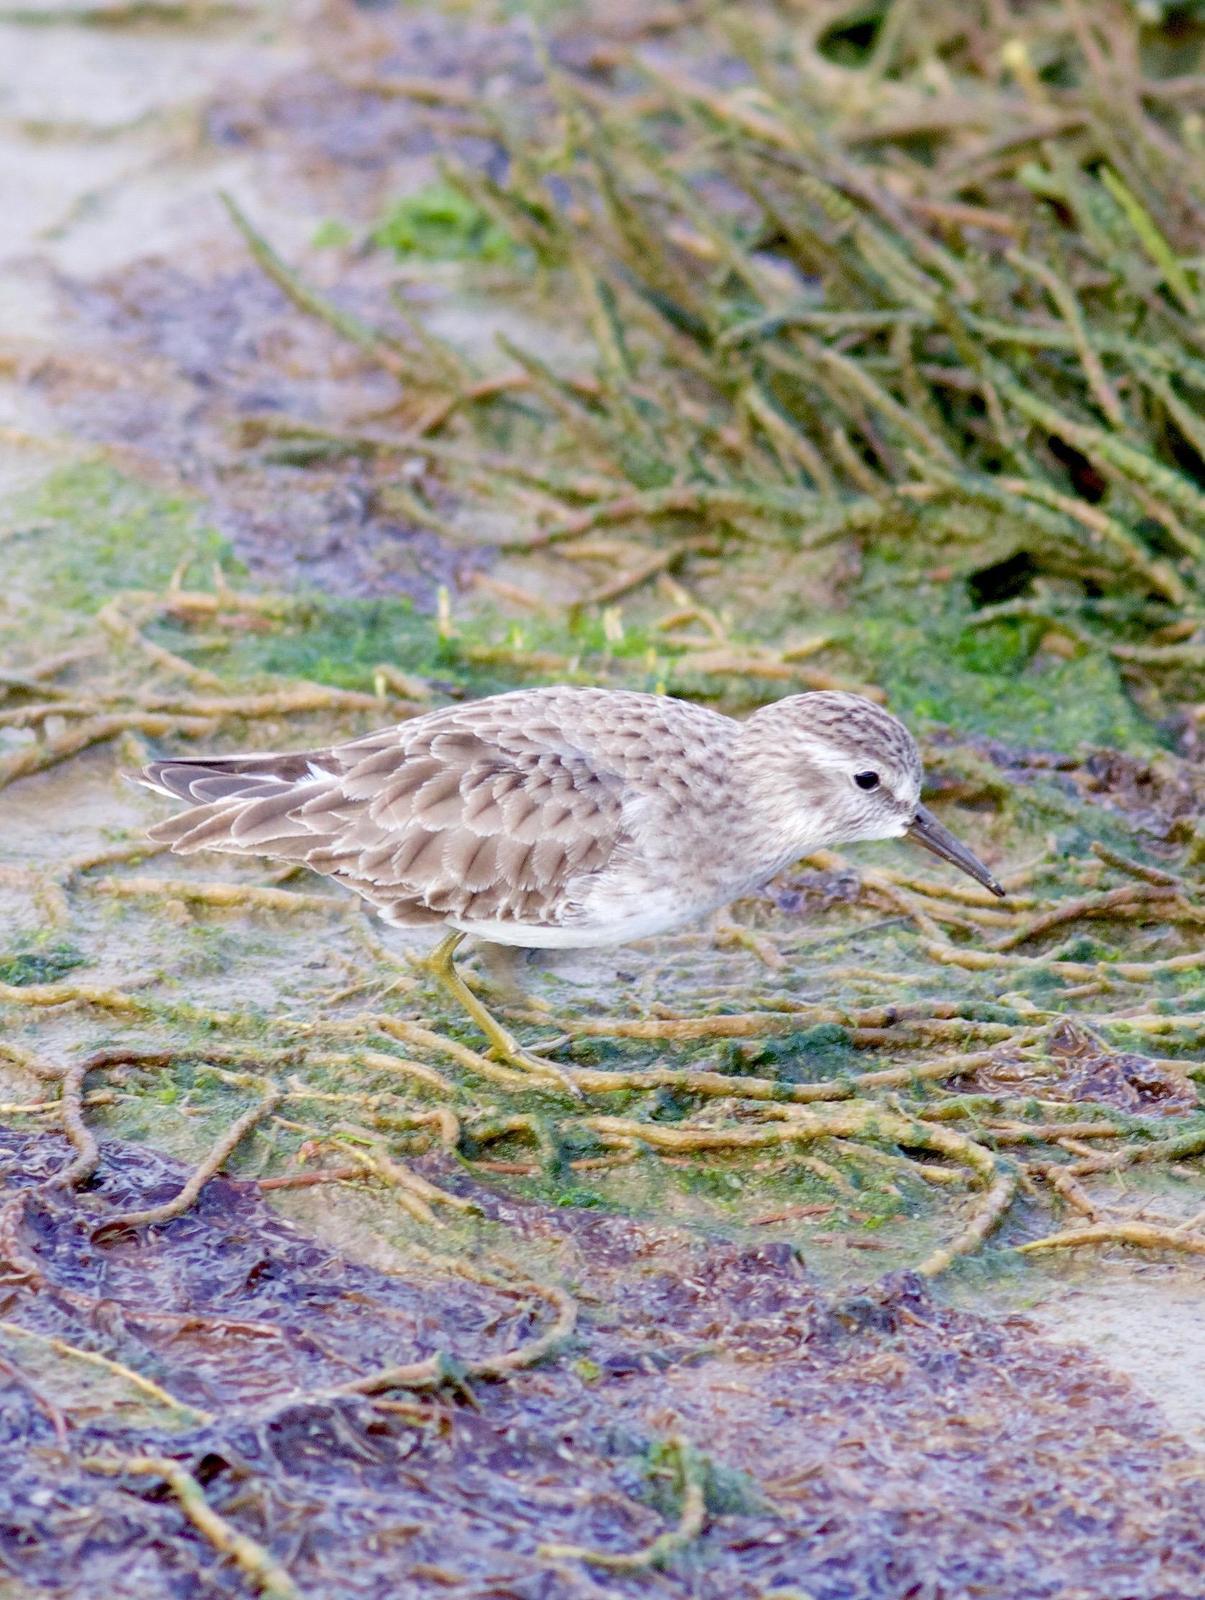 Least Sandpiper Photo by Kathryn Keith